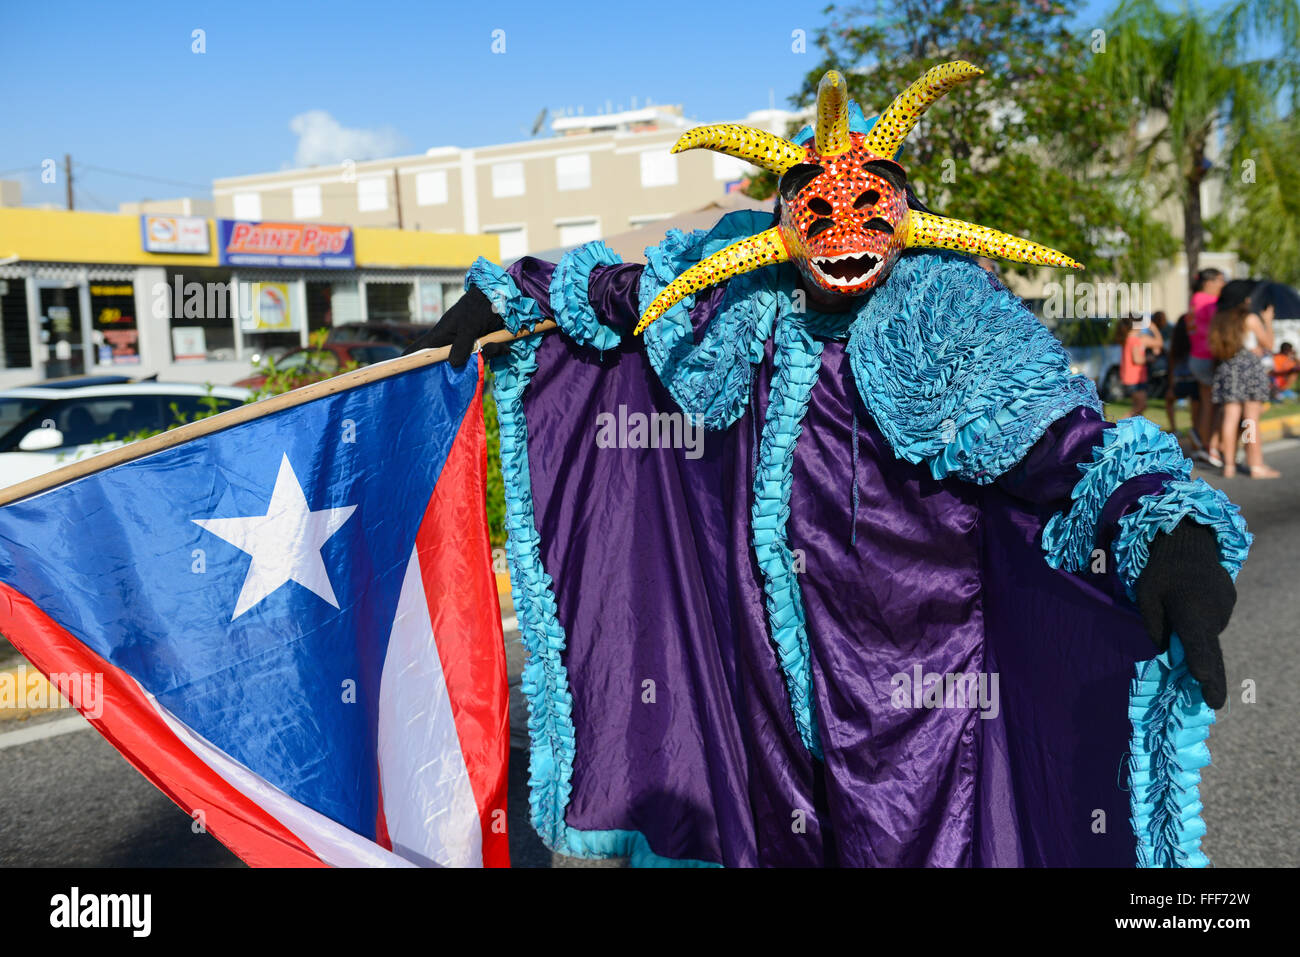 Traditional cultural figure VEJIGANTE posing with flag during the carnival in Ponce. Puerto Rico. US territory. February 2016 Stock Photo